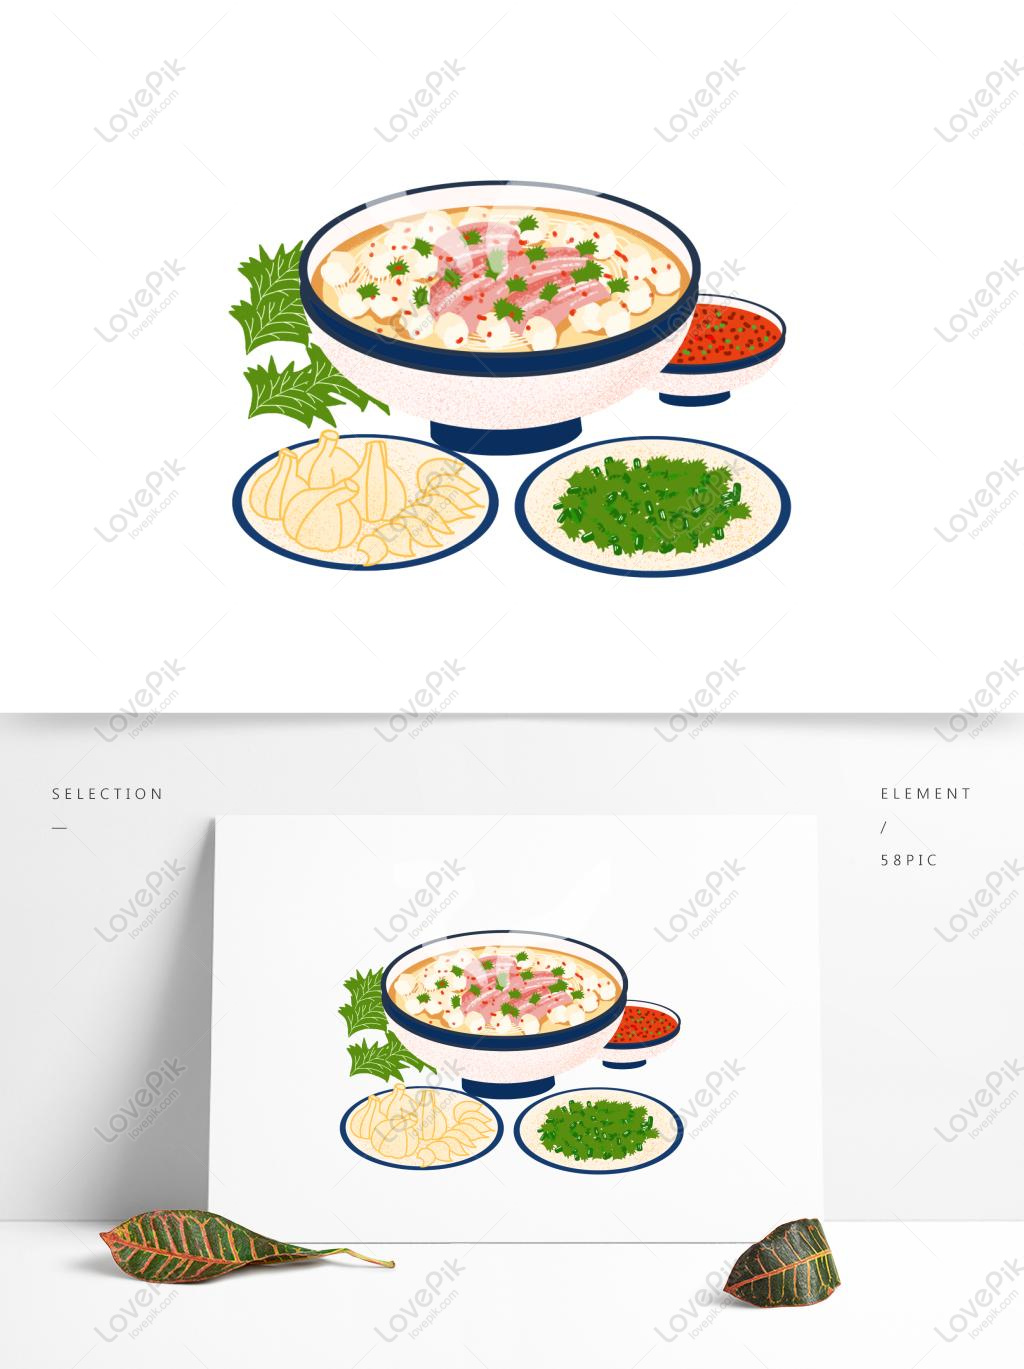 Hand Drawn Cartoon Food Free Elements PNG Image PSD images free ...